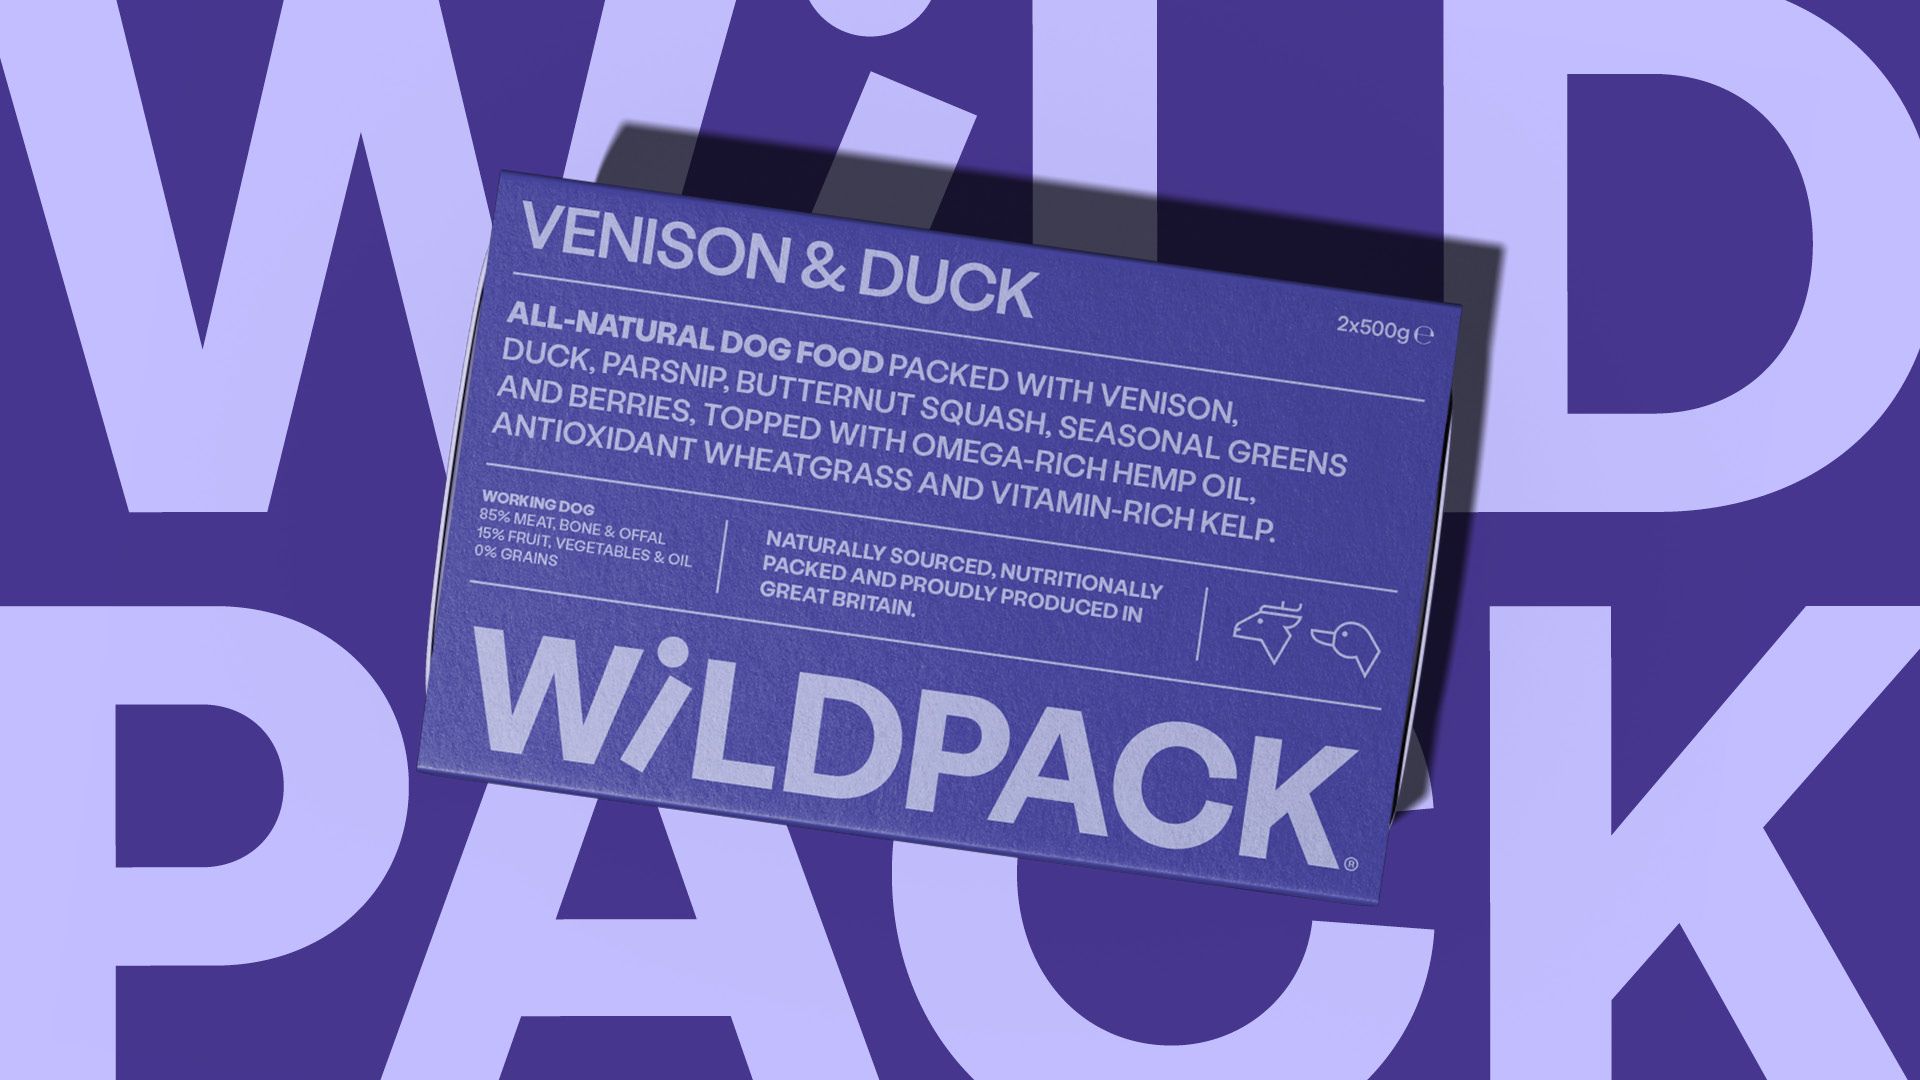 Wild Pack’s New Branding Is Of An Elevated Pedigree